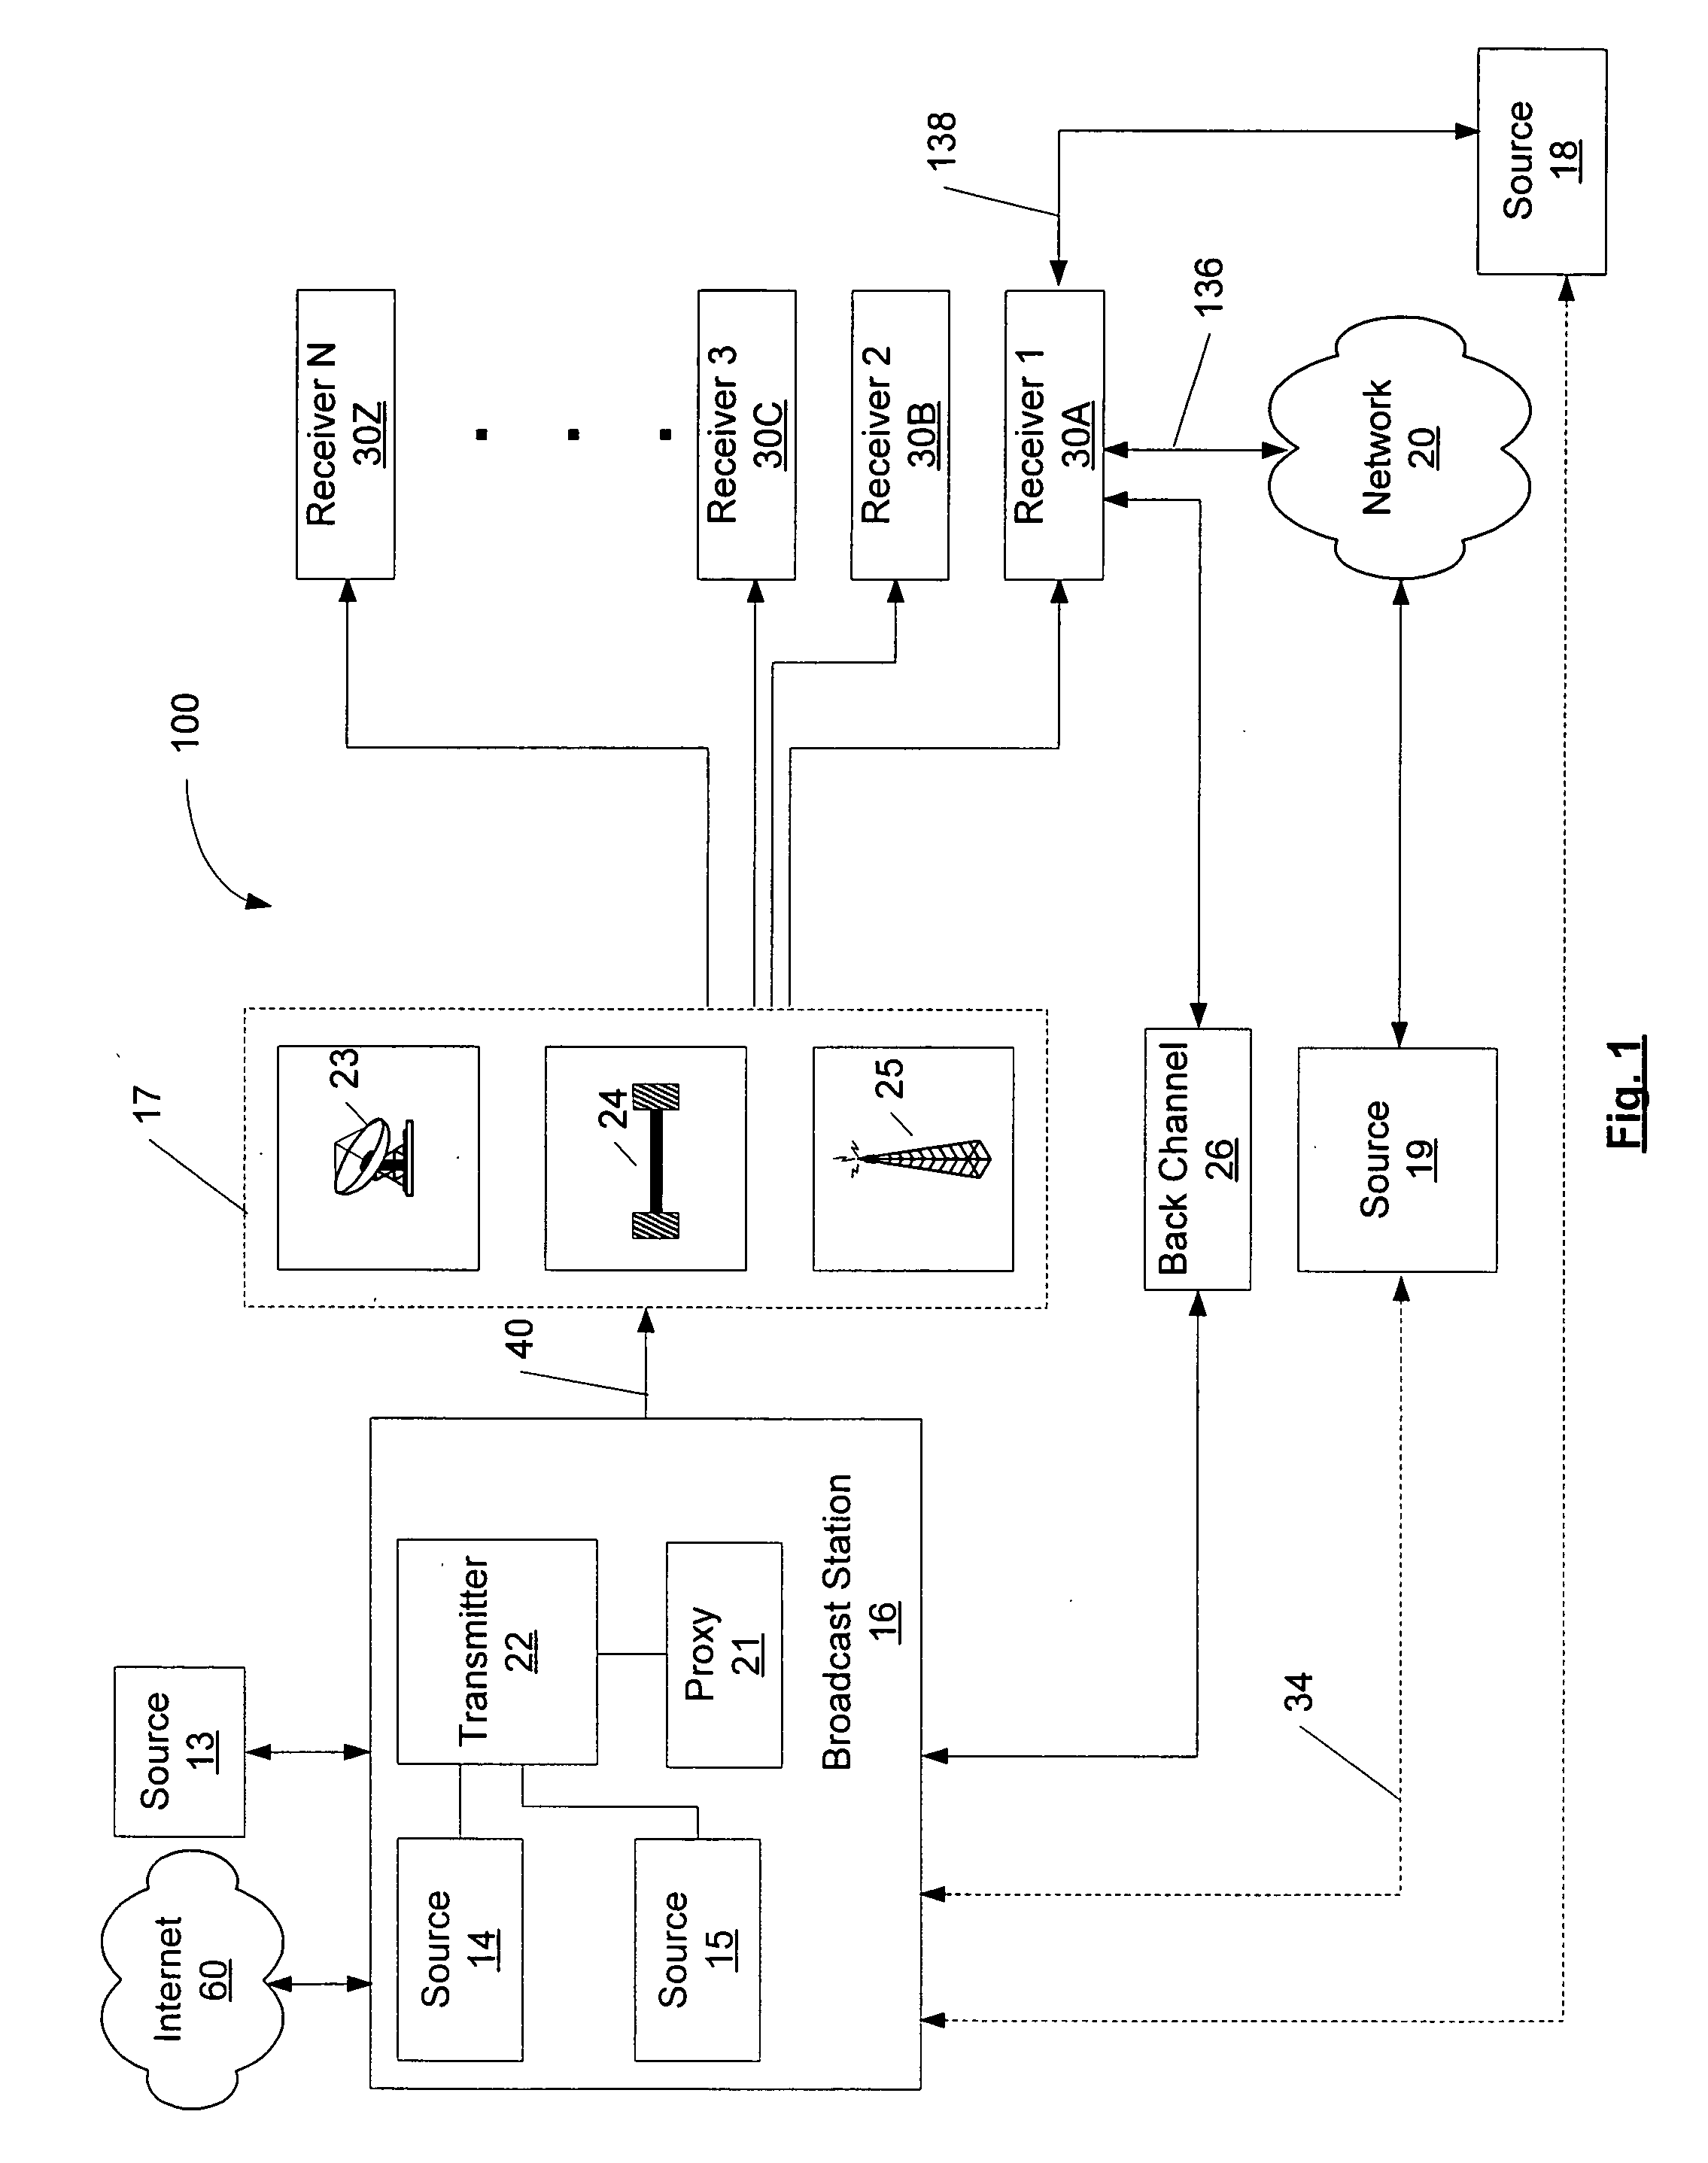 System for managing data in a distributed computing system